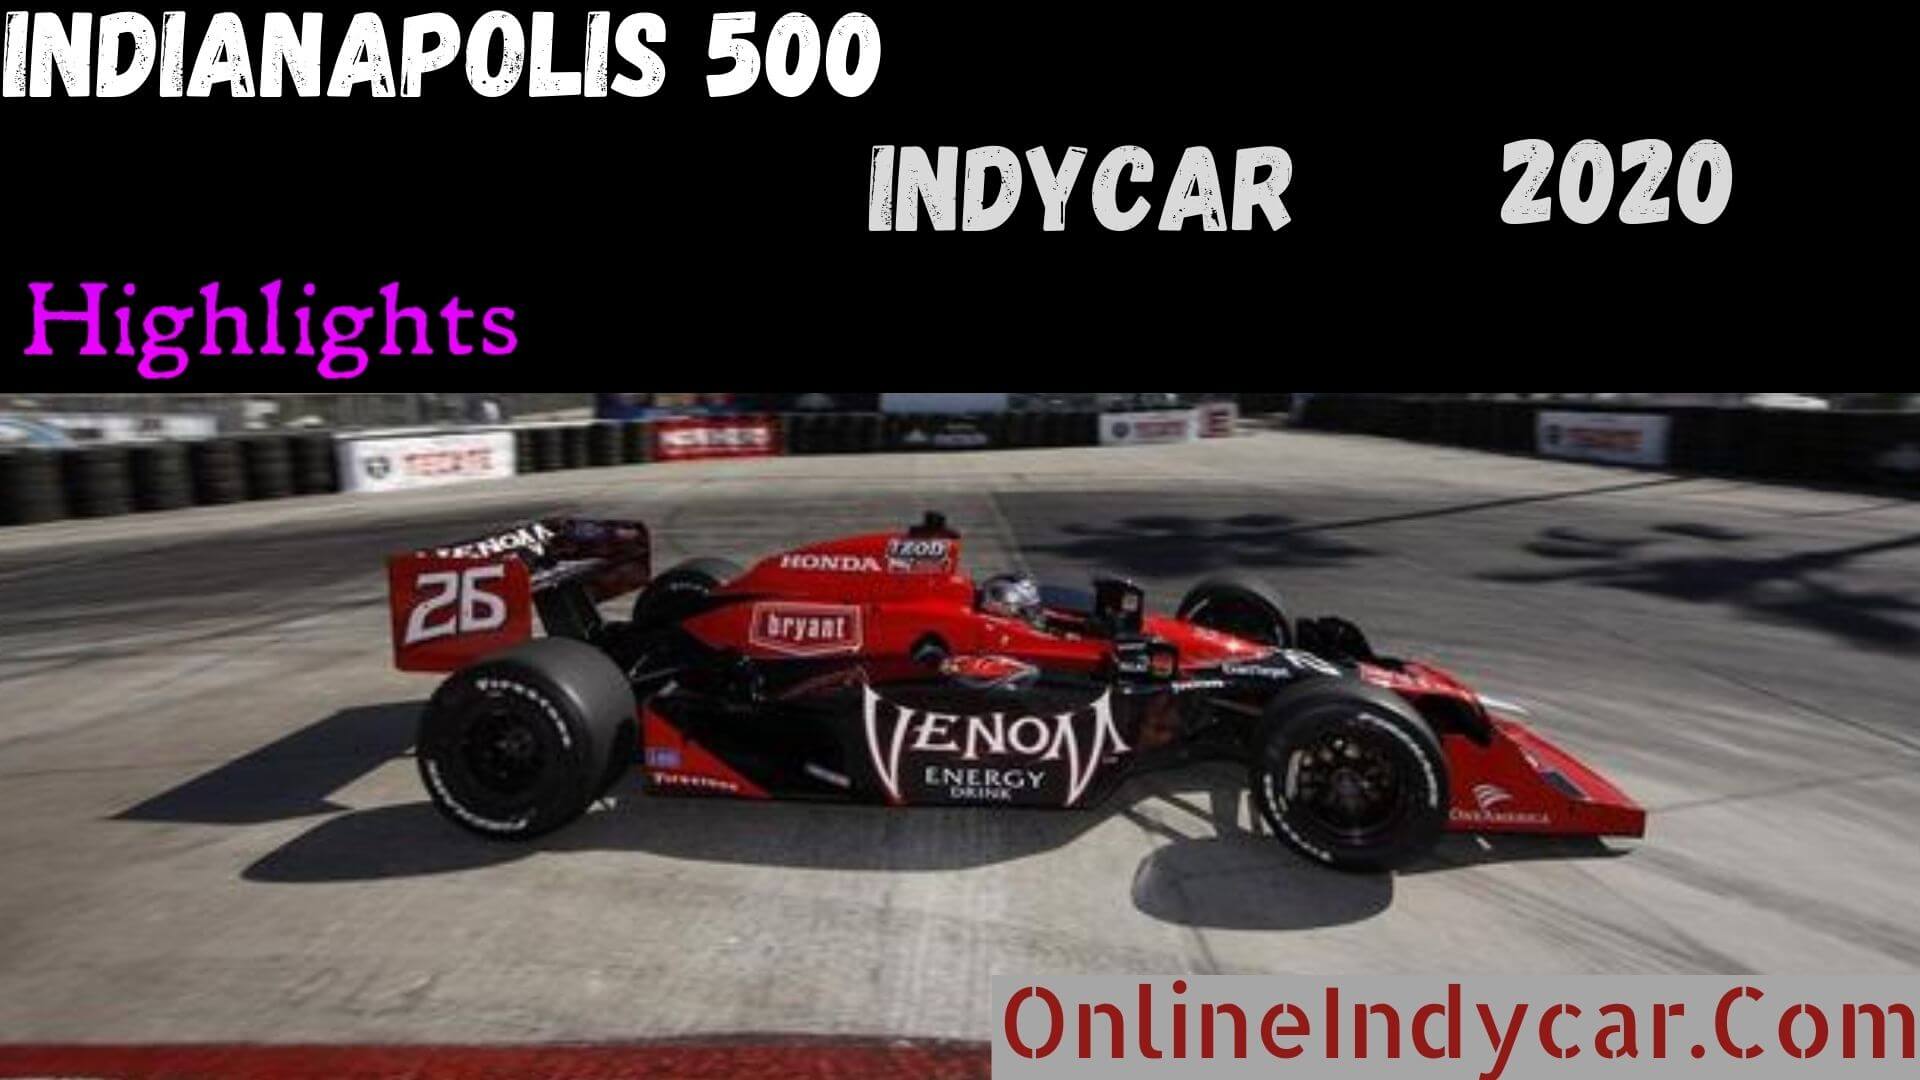 Indianapolis 500 Indycar Highlights 2020